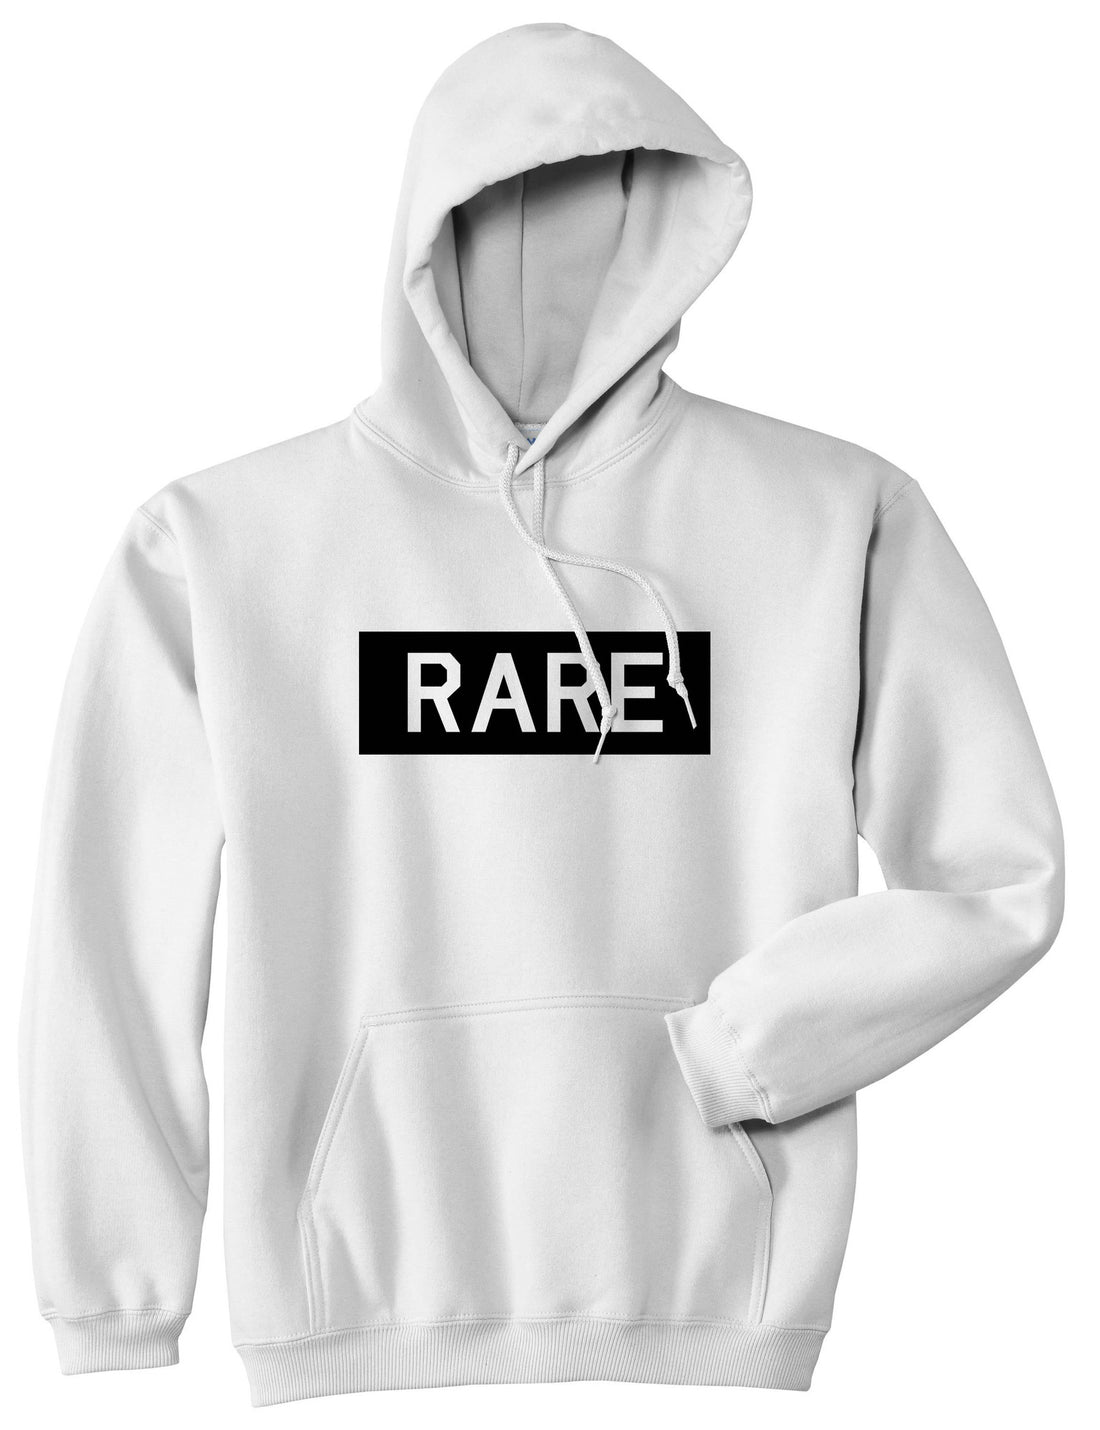 Rare College Block Pullover Hoodie Hoody in White by Kings Of NY